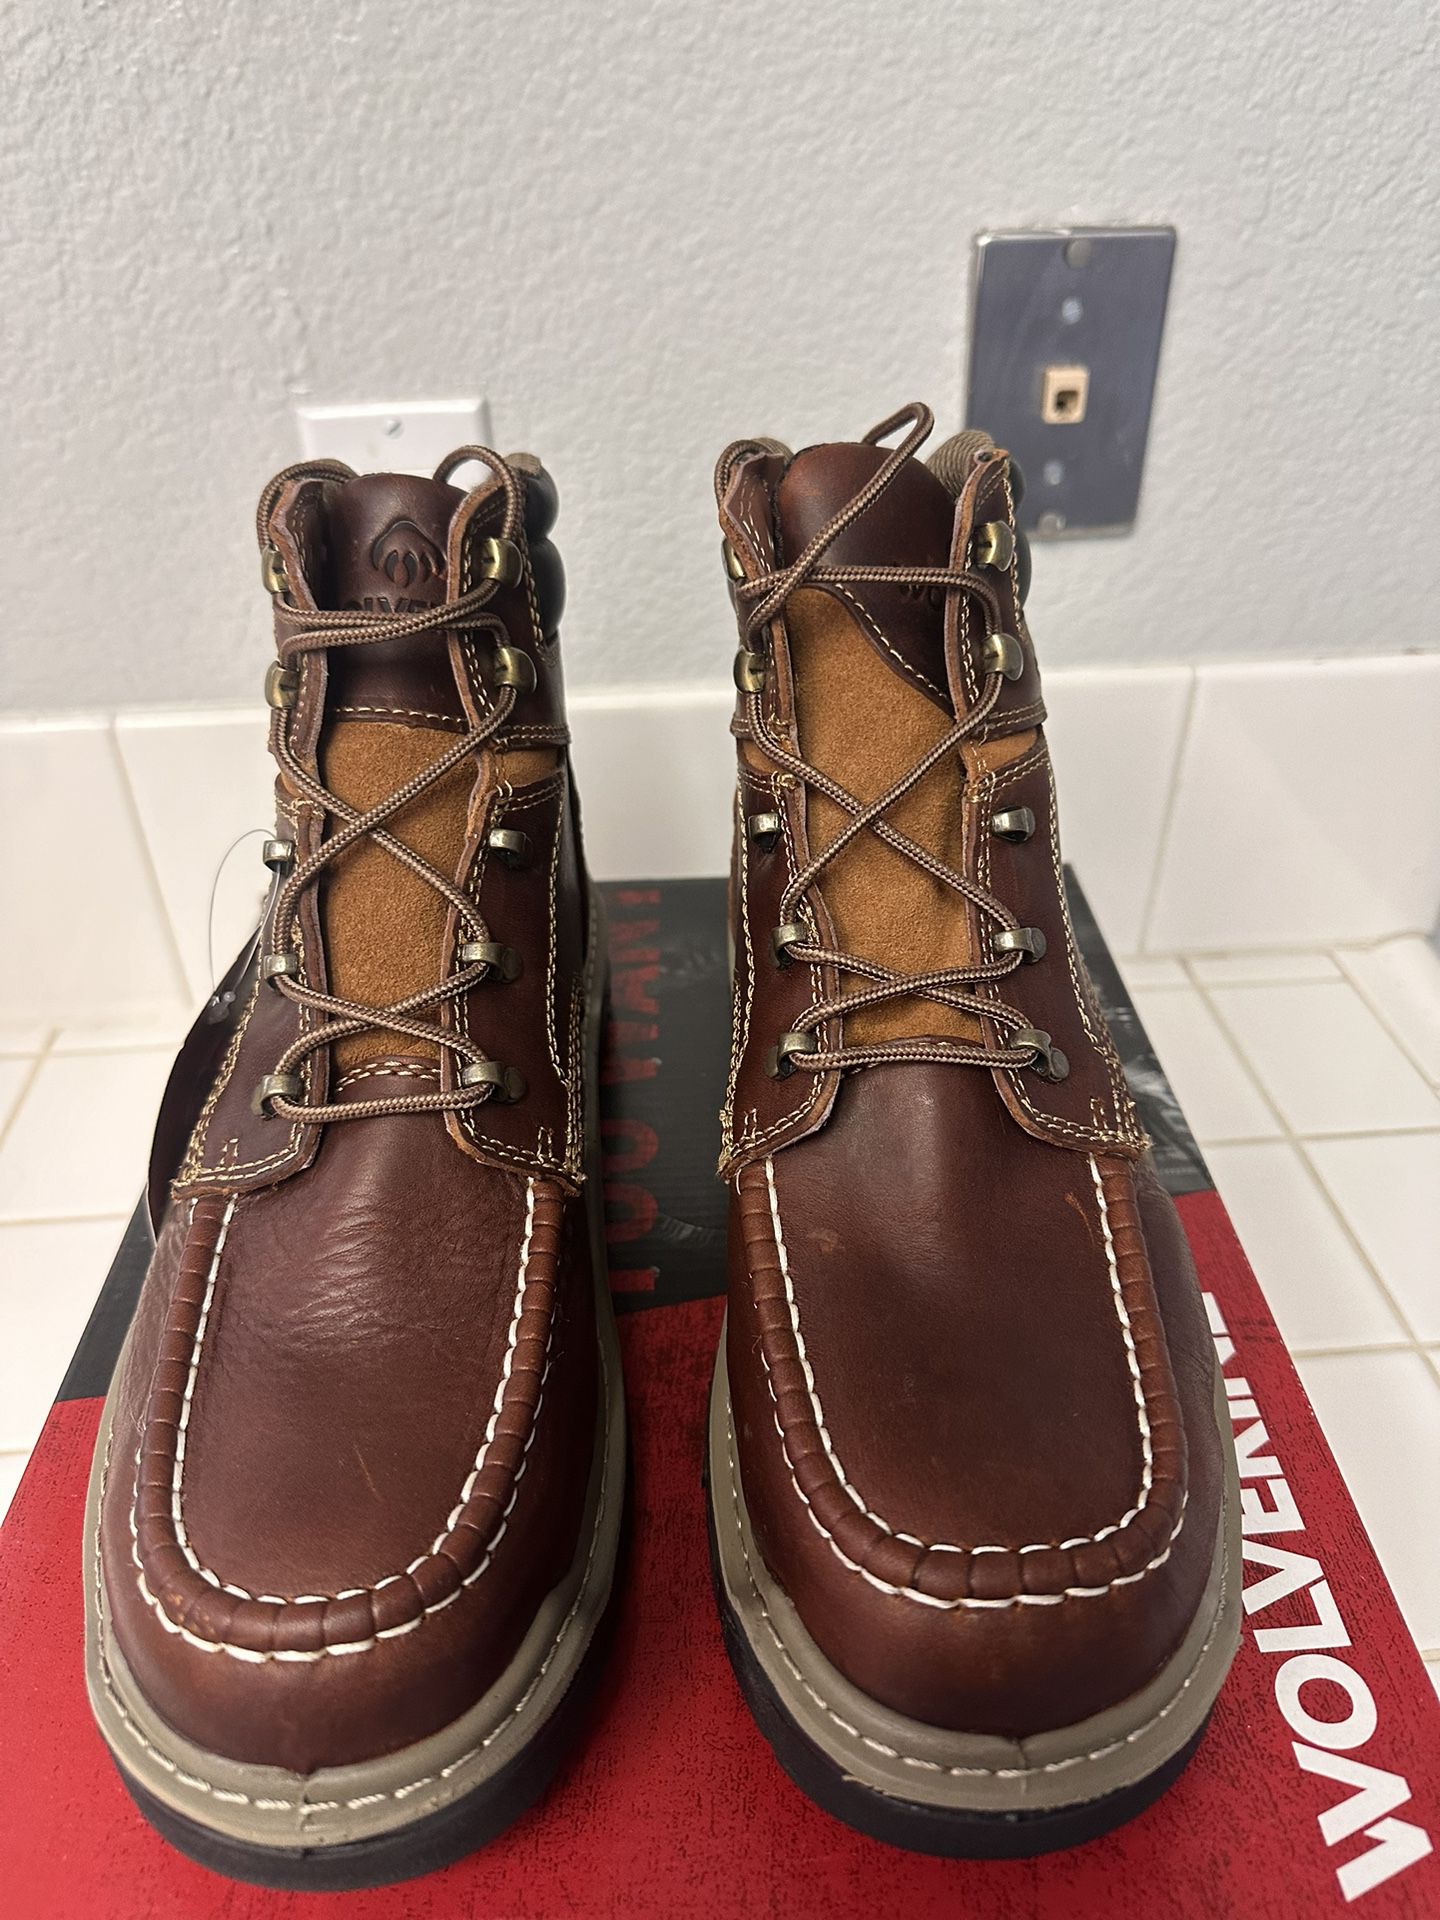 Brand New Wolverine Work Boots For Men. Size 8.5. 9.5 And 10. Carbon Toe